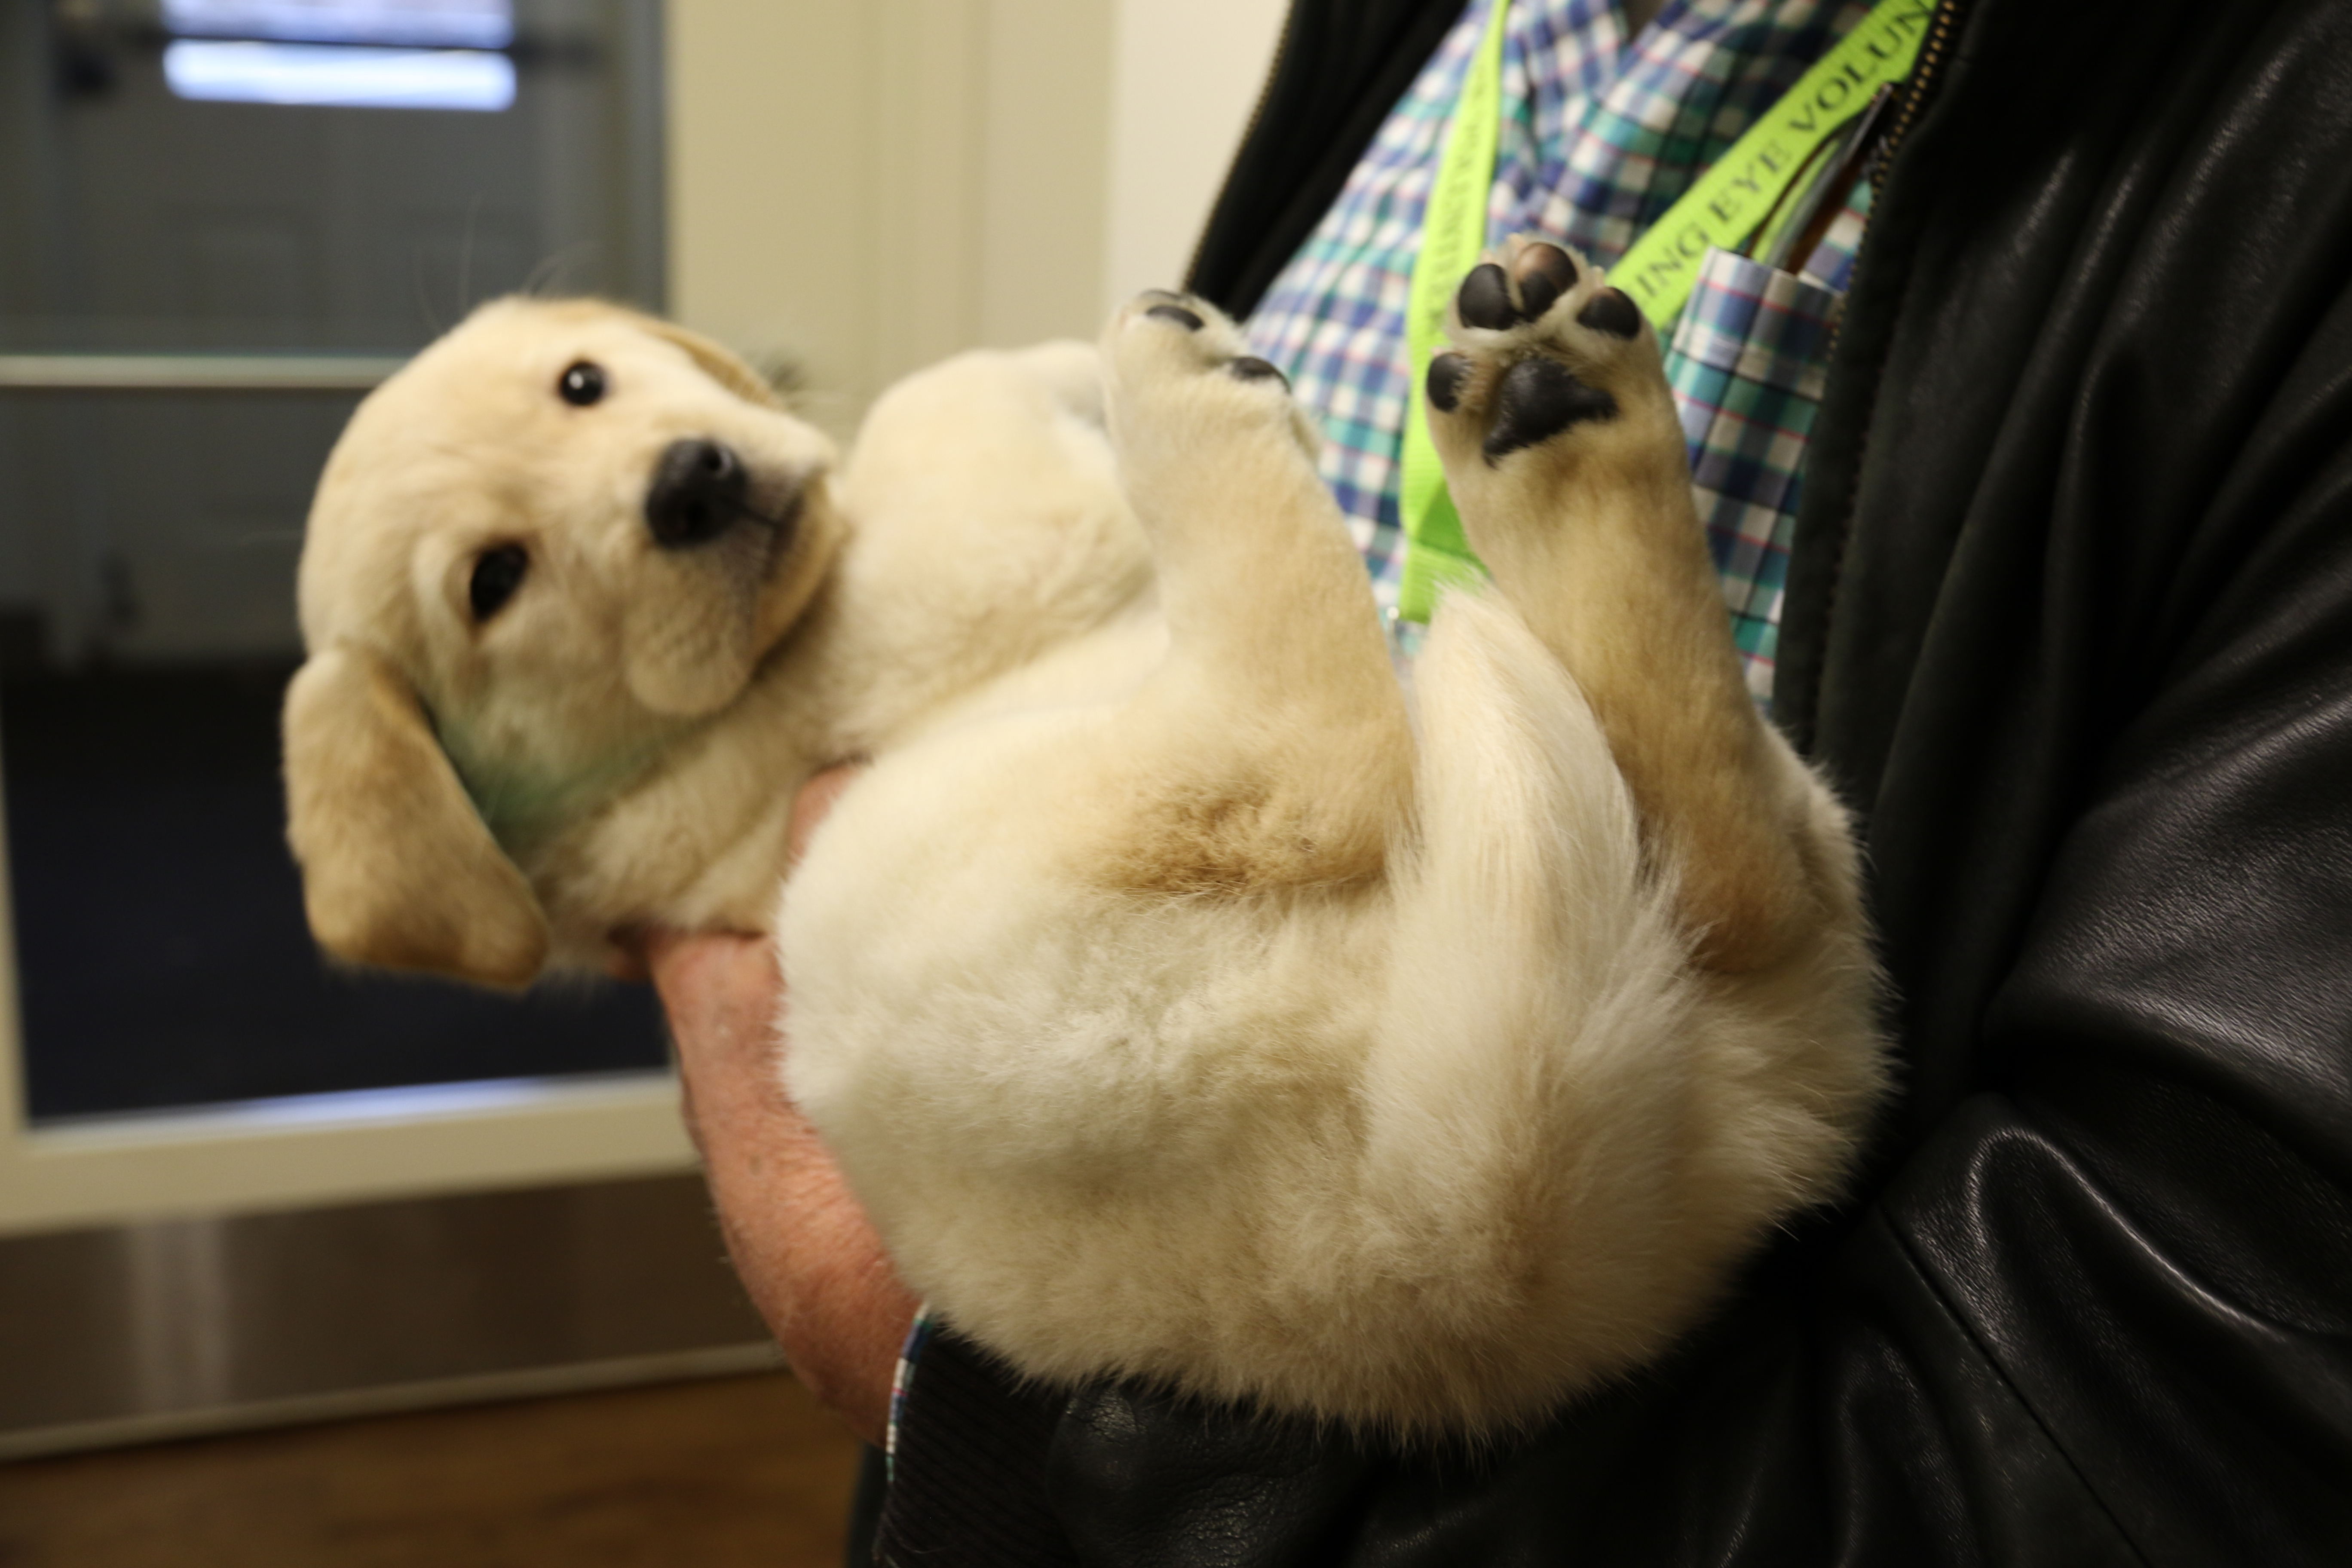 A small yellow Lab puppy is cradled in a person’s arms like a baby. The photo is taken from one side, so the puppy’s head is farthest from the camera and a bit out of focus. Its tail and hind legs, which are pointing up in the air, are the focal point of the photo.